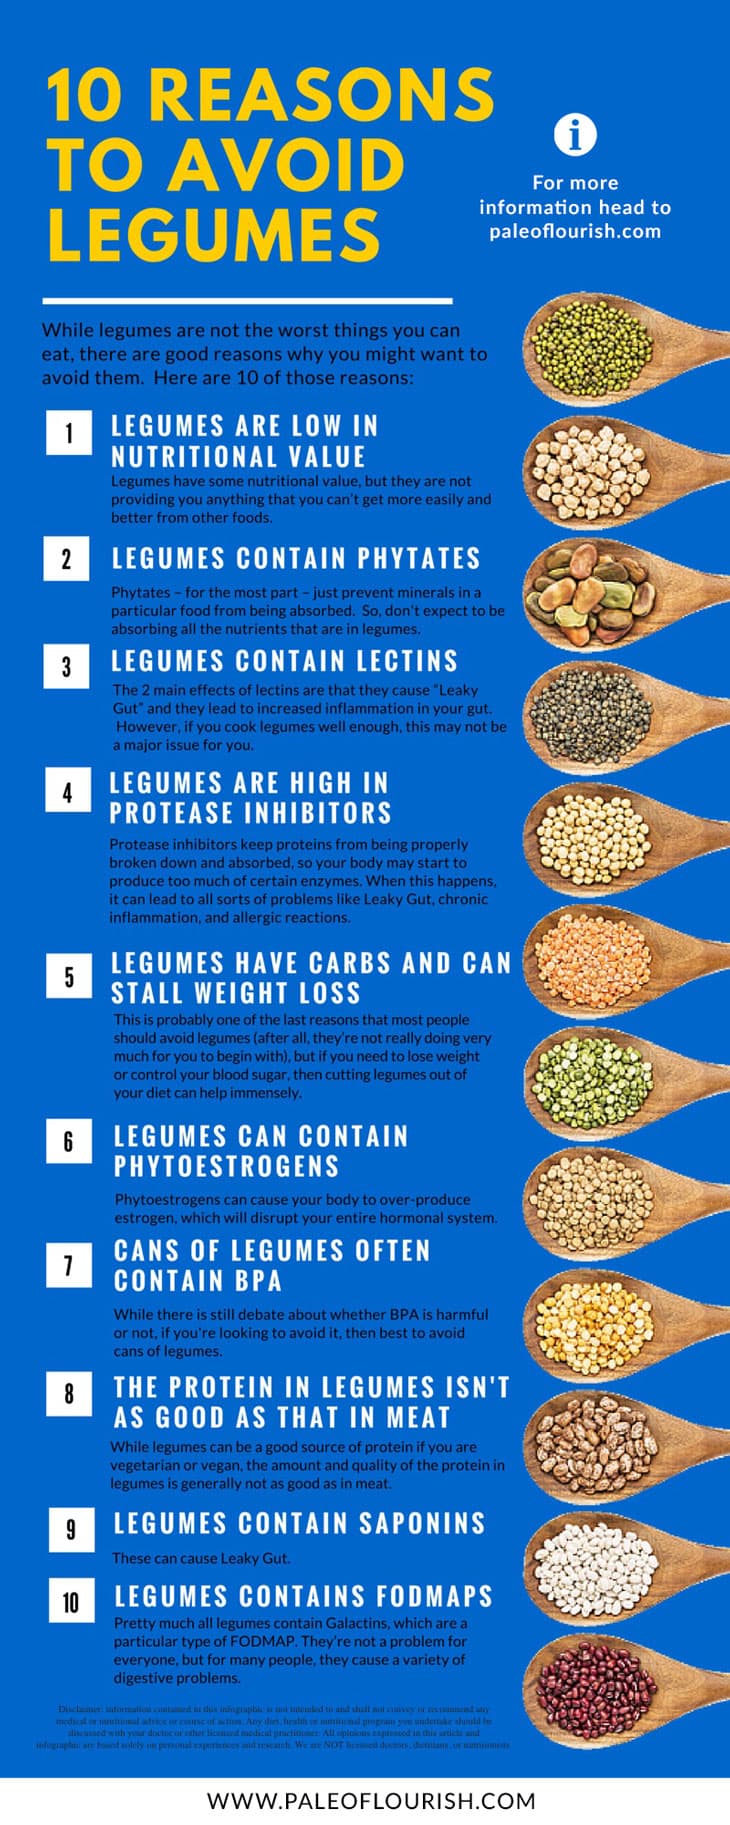 10 Reasons To Avoid Legumes on a Paleo Diet Infographic